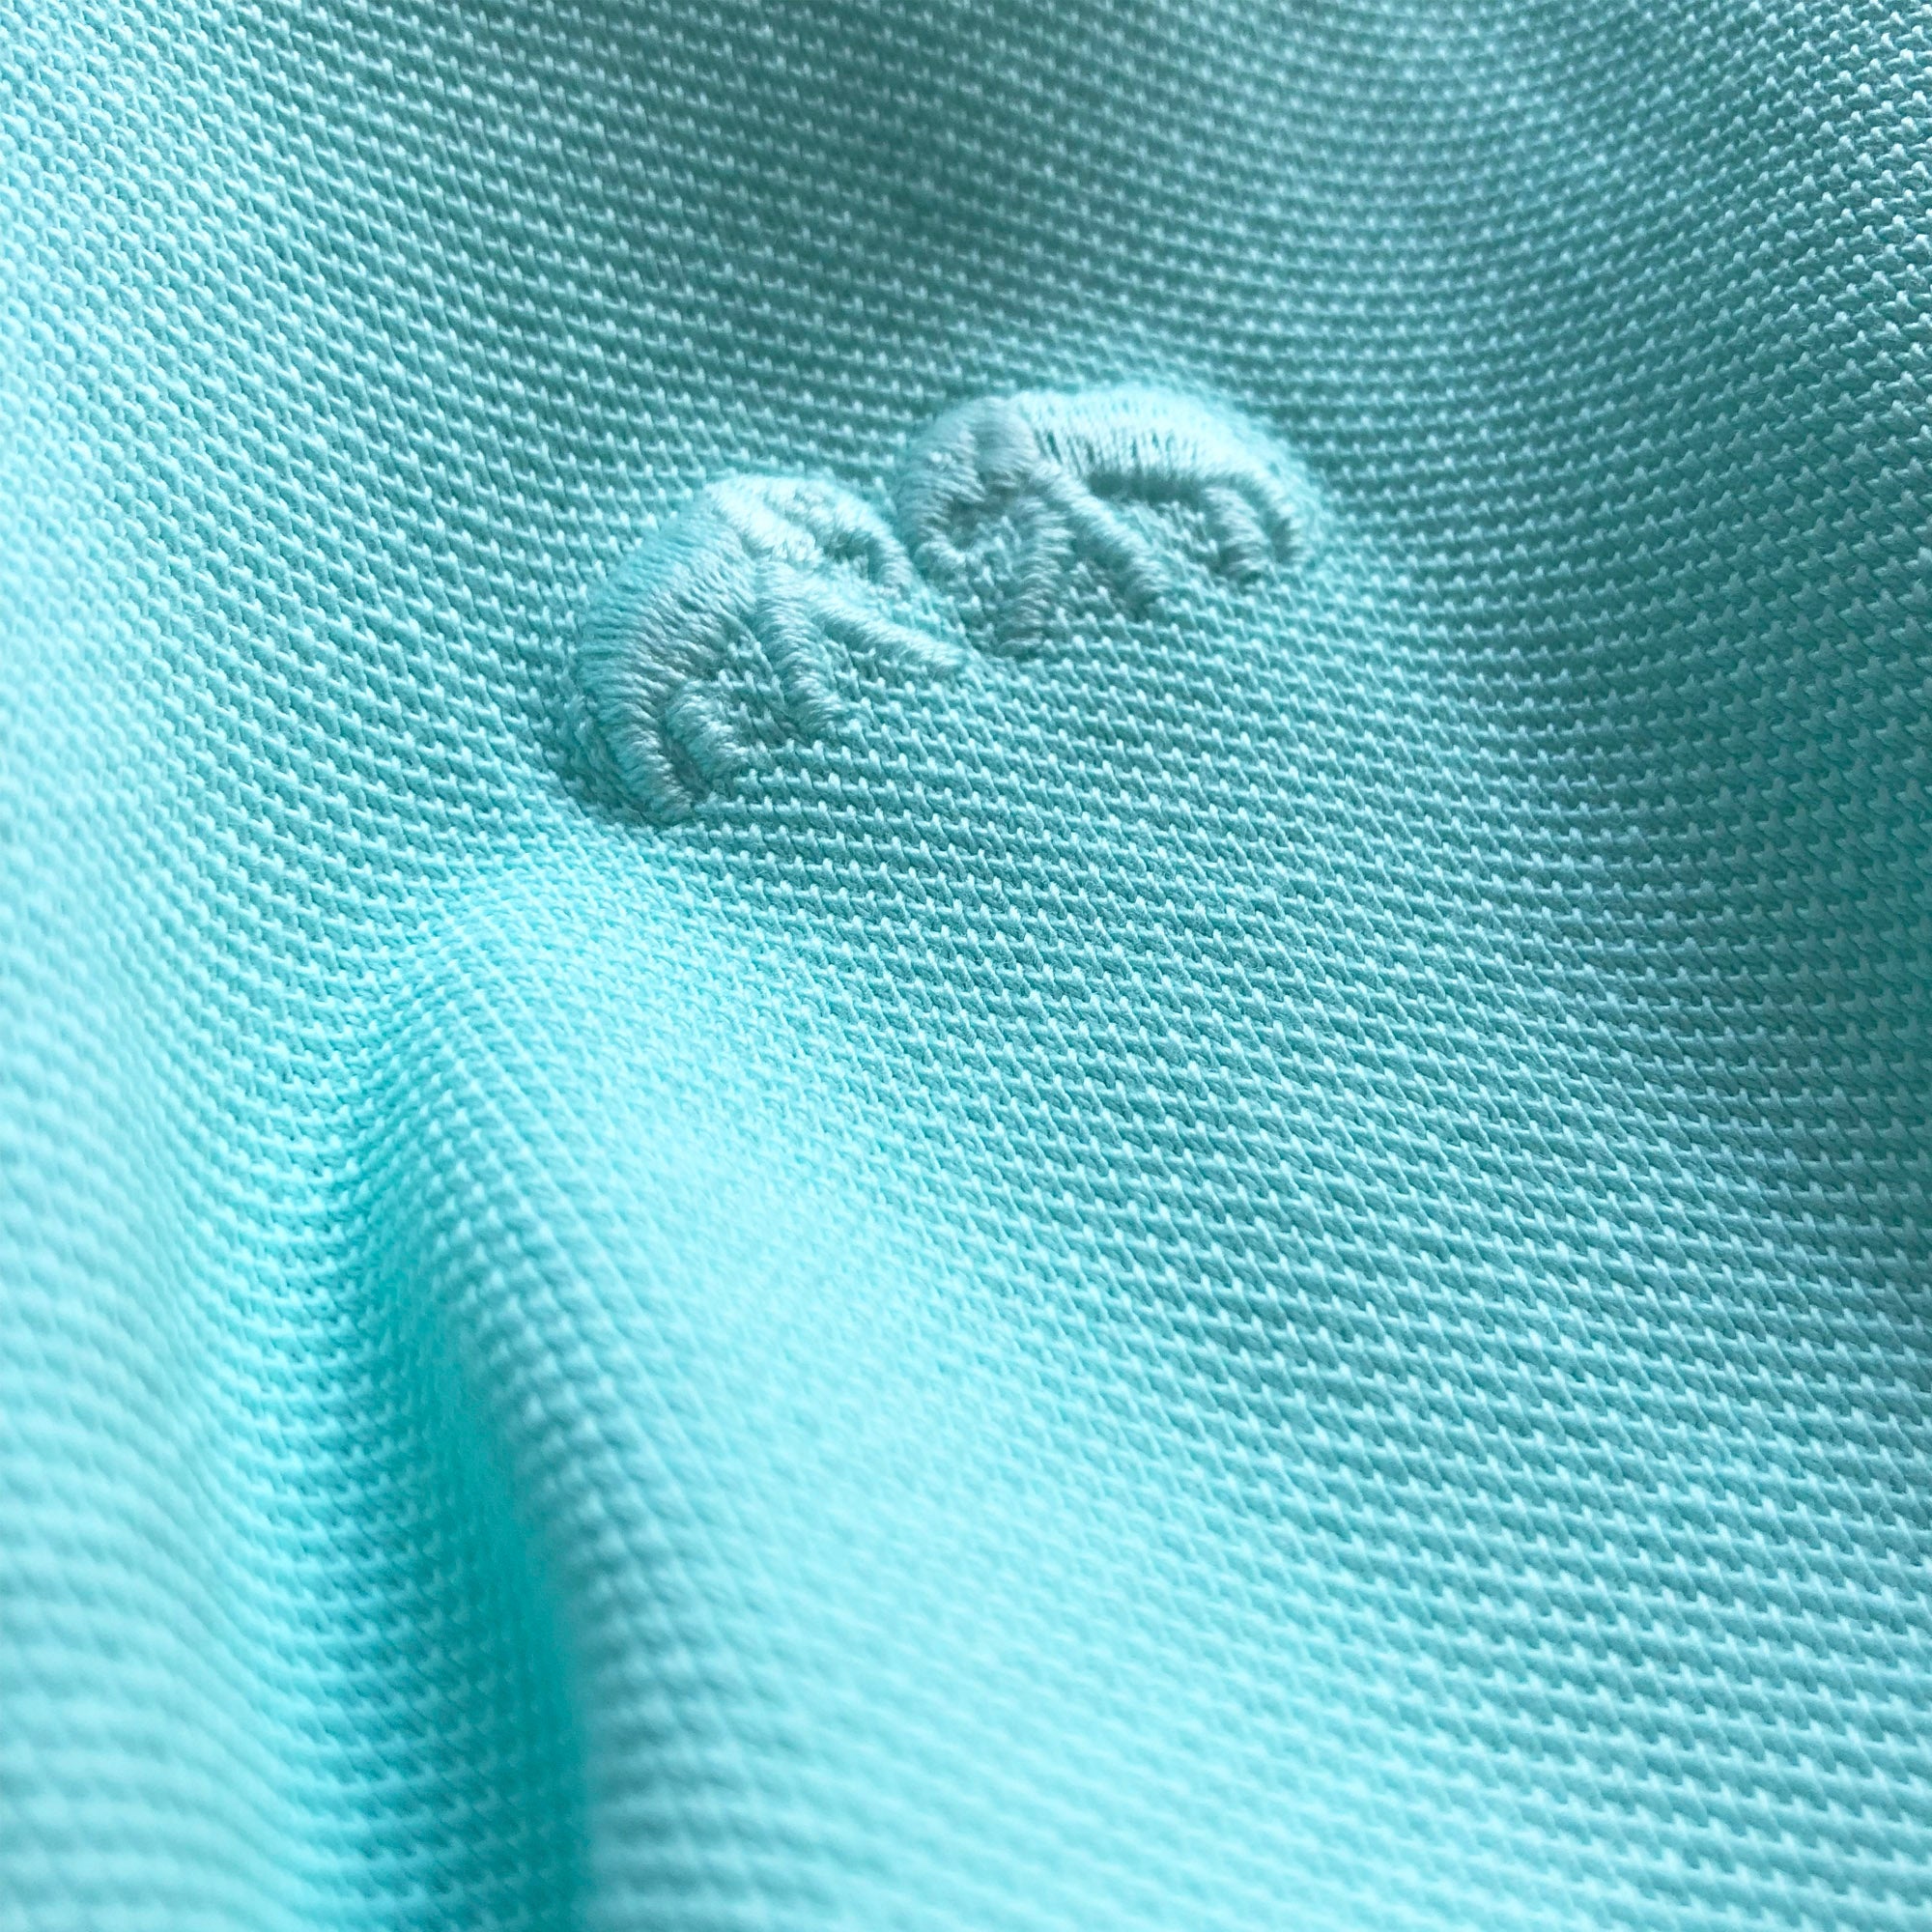 Close-up of the Men's Cay Green Pensacola Polo Shirt fabric and embroidered logo, inspired by the aqua hues of Bahamian seas.